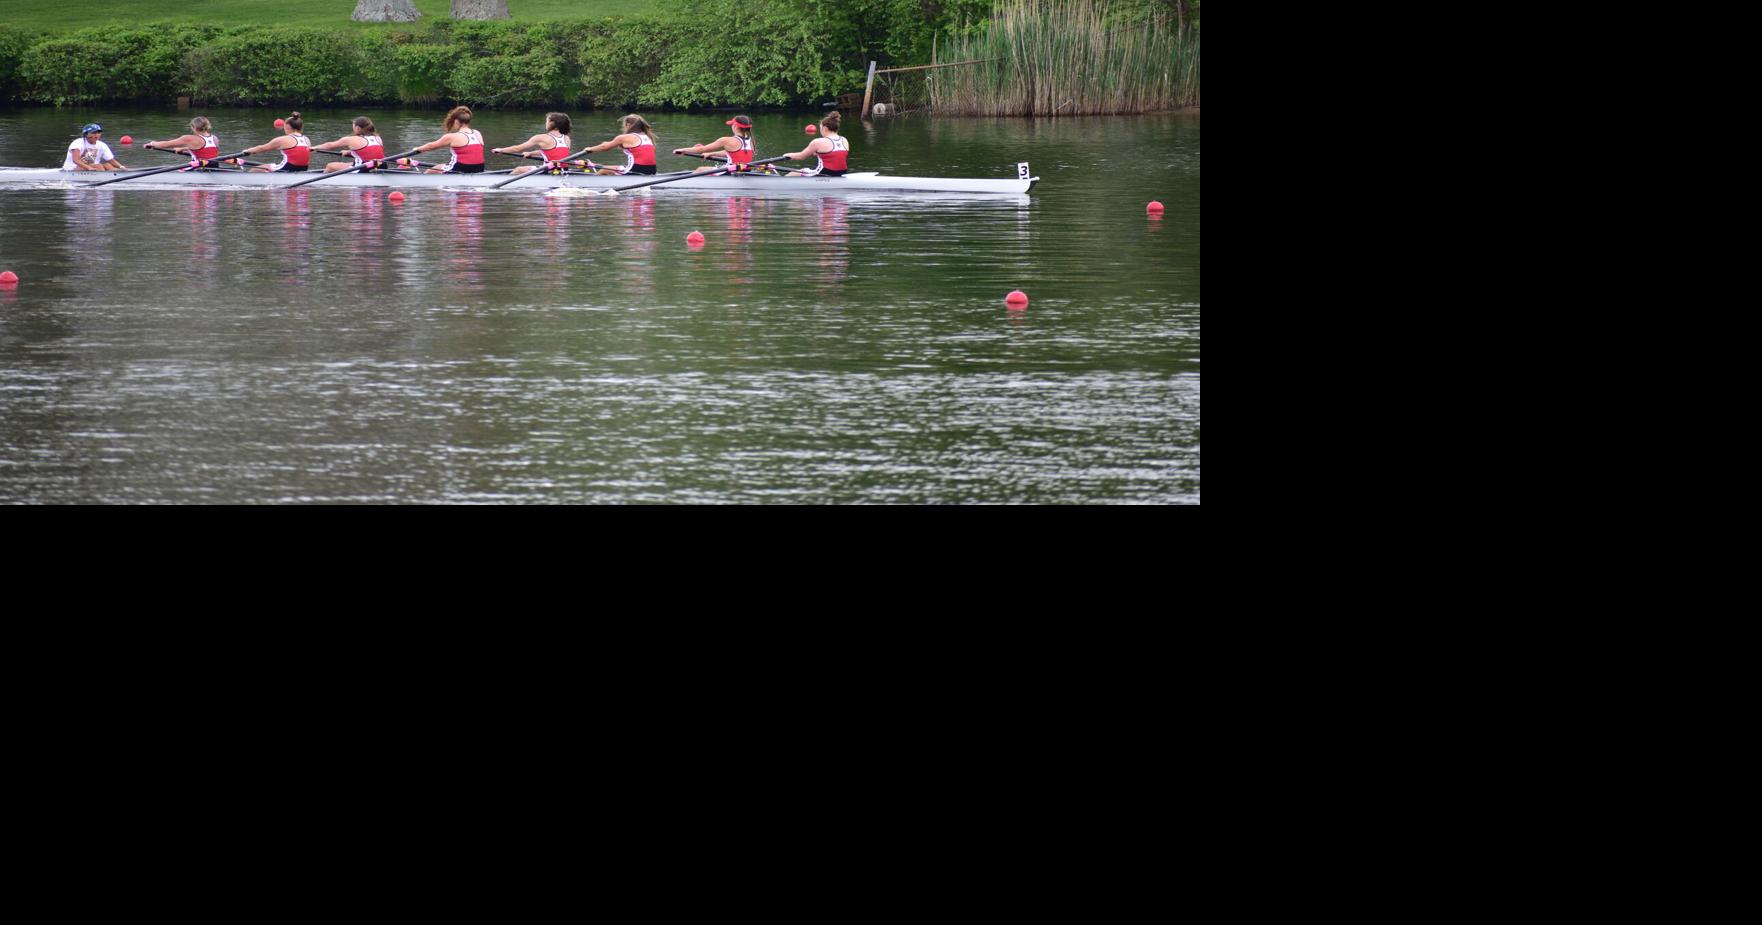 Results from Sunday's Lake Lenape racing